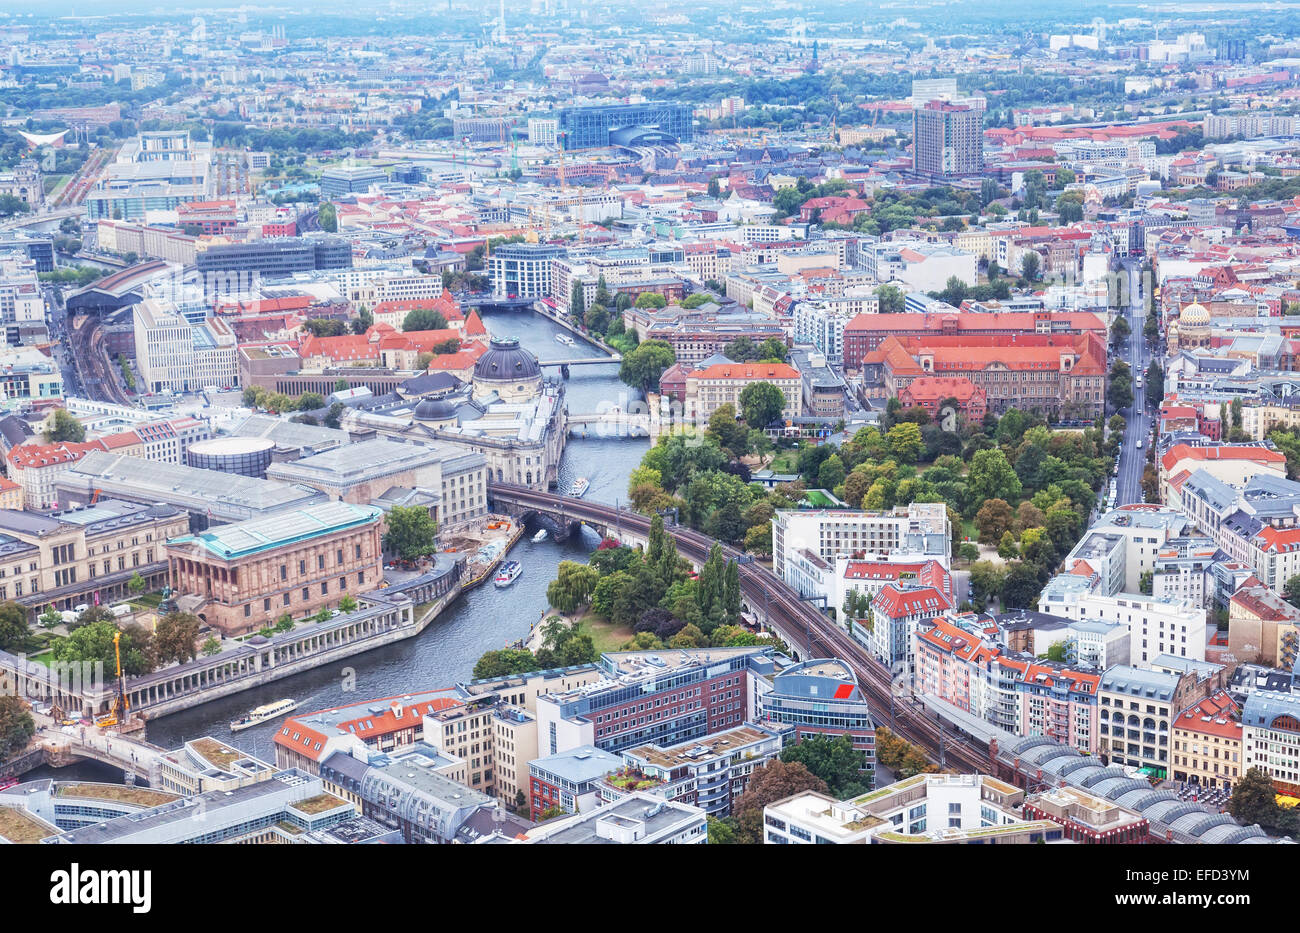 View of Berlin from an observation deck of the Berlin television tower Stock Photo